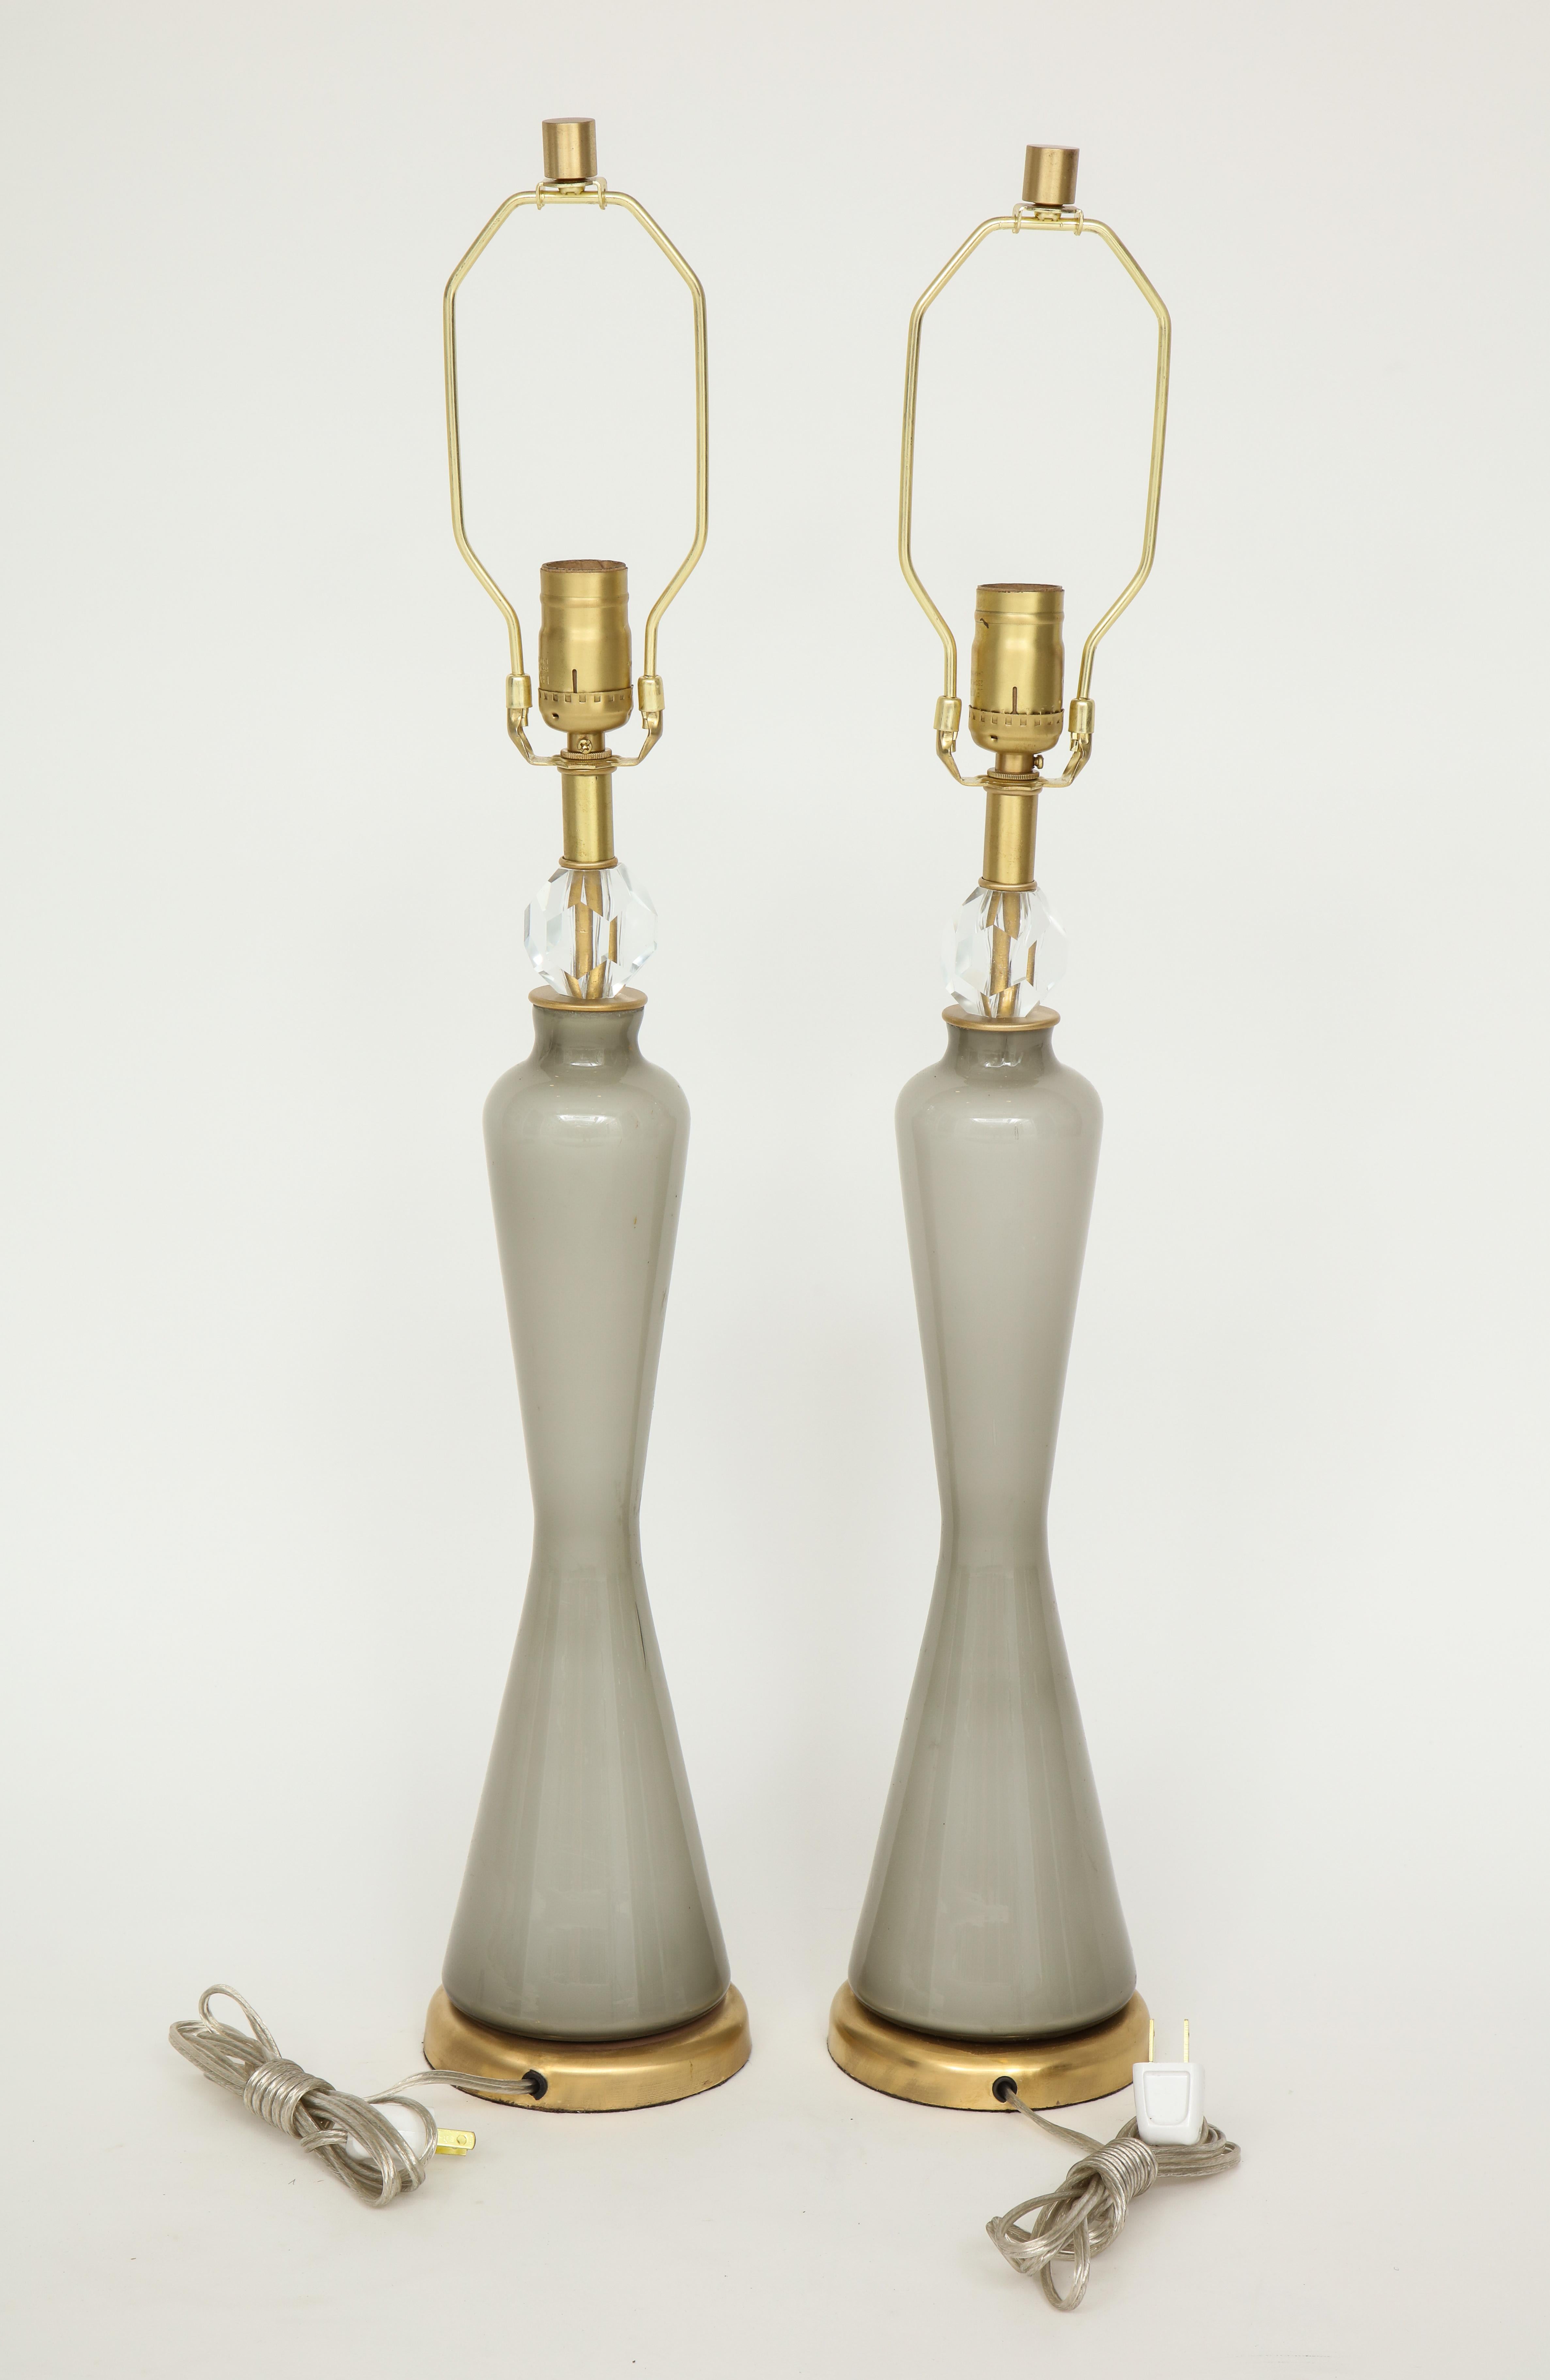 Pair of grey over white Murano glass lamps with a sinuous shaped body on brushed brass bases and faceted crystal collars. Rewired for use in the USA. 100W max bulbs. Glass measures 17.5 inches.